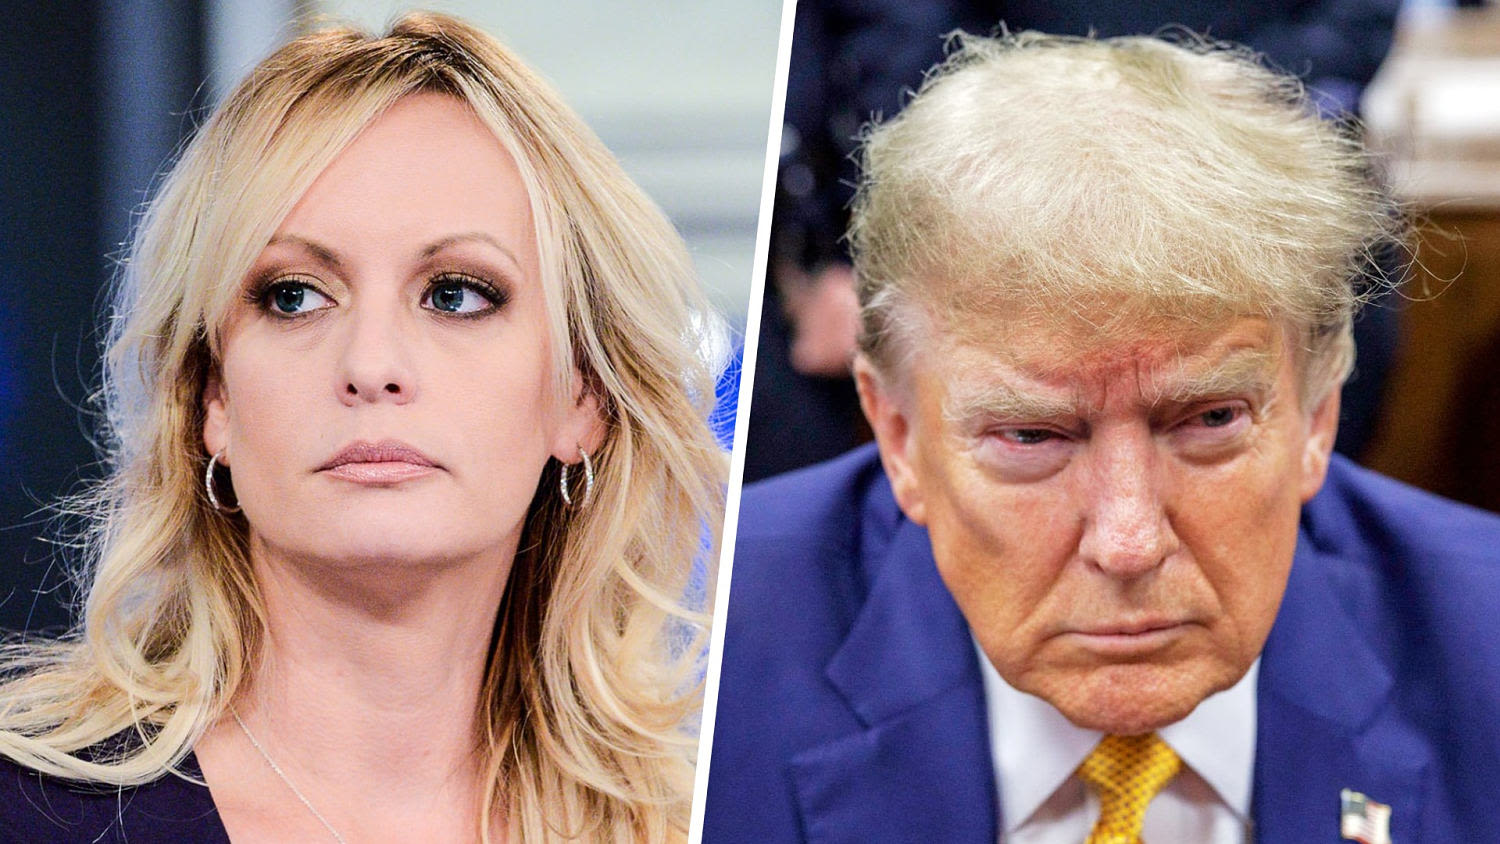 Stormy was 'pretty emotional' over verdict: Daniels' lawyer speaks out on Trump's felony conviction